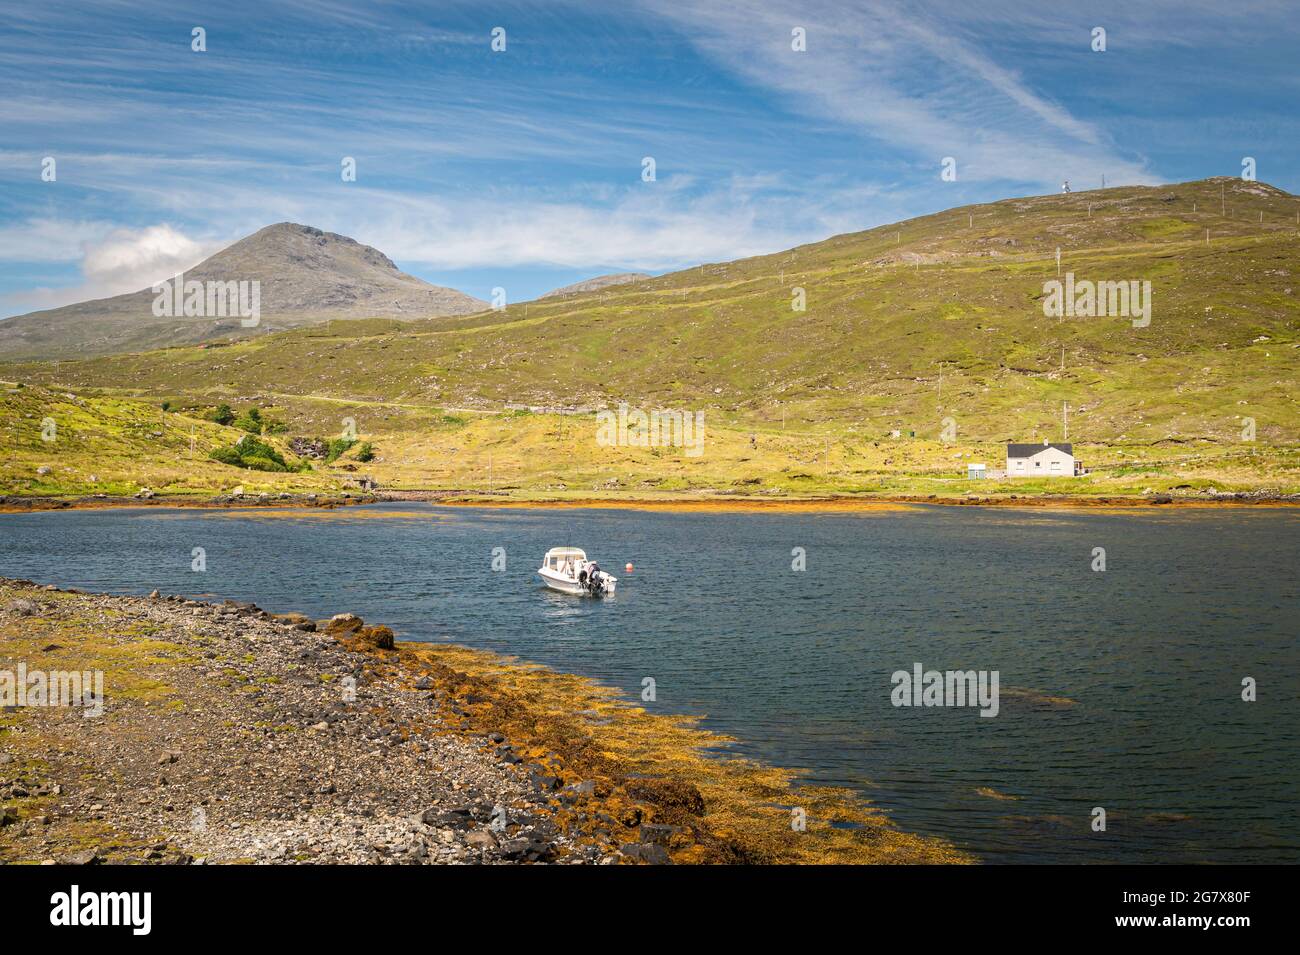 A summer 3 shot HDR image of Clisham, An Clisean, and Loch Mariag, Mharaig, on the Isle of Harris, Outer Hebrides, Scotland. 28 June 2021 Stock Photo